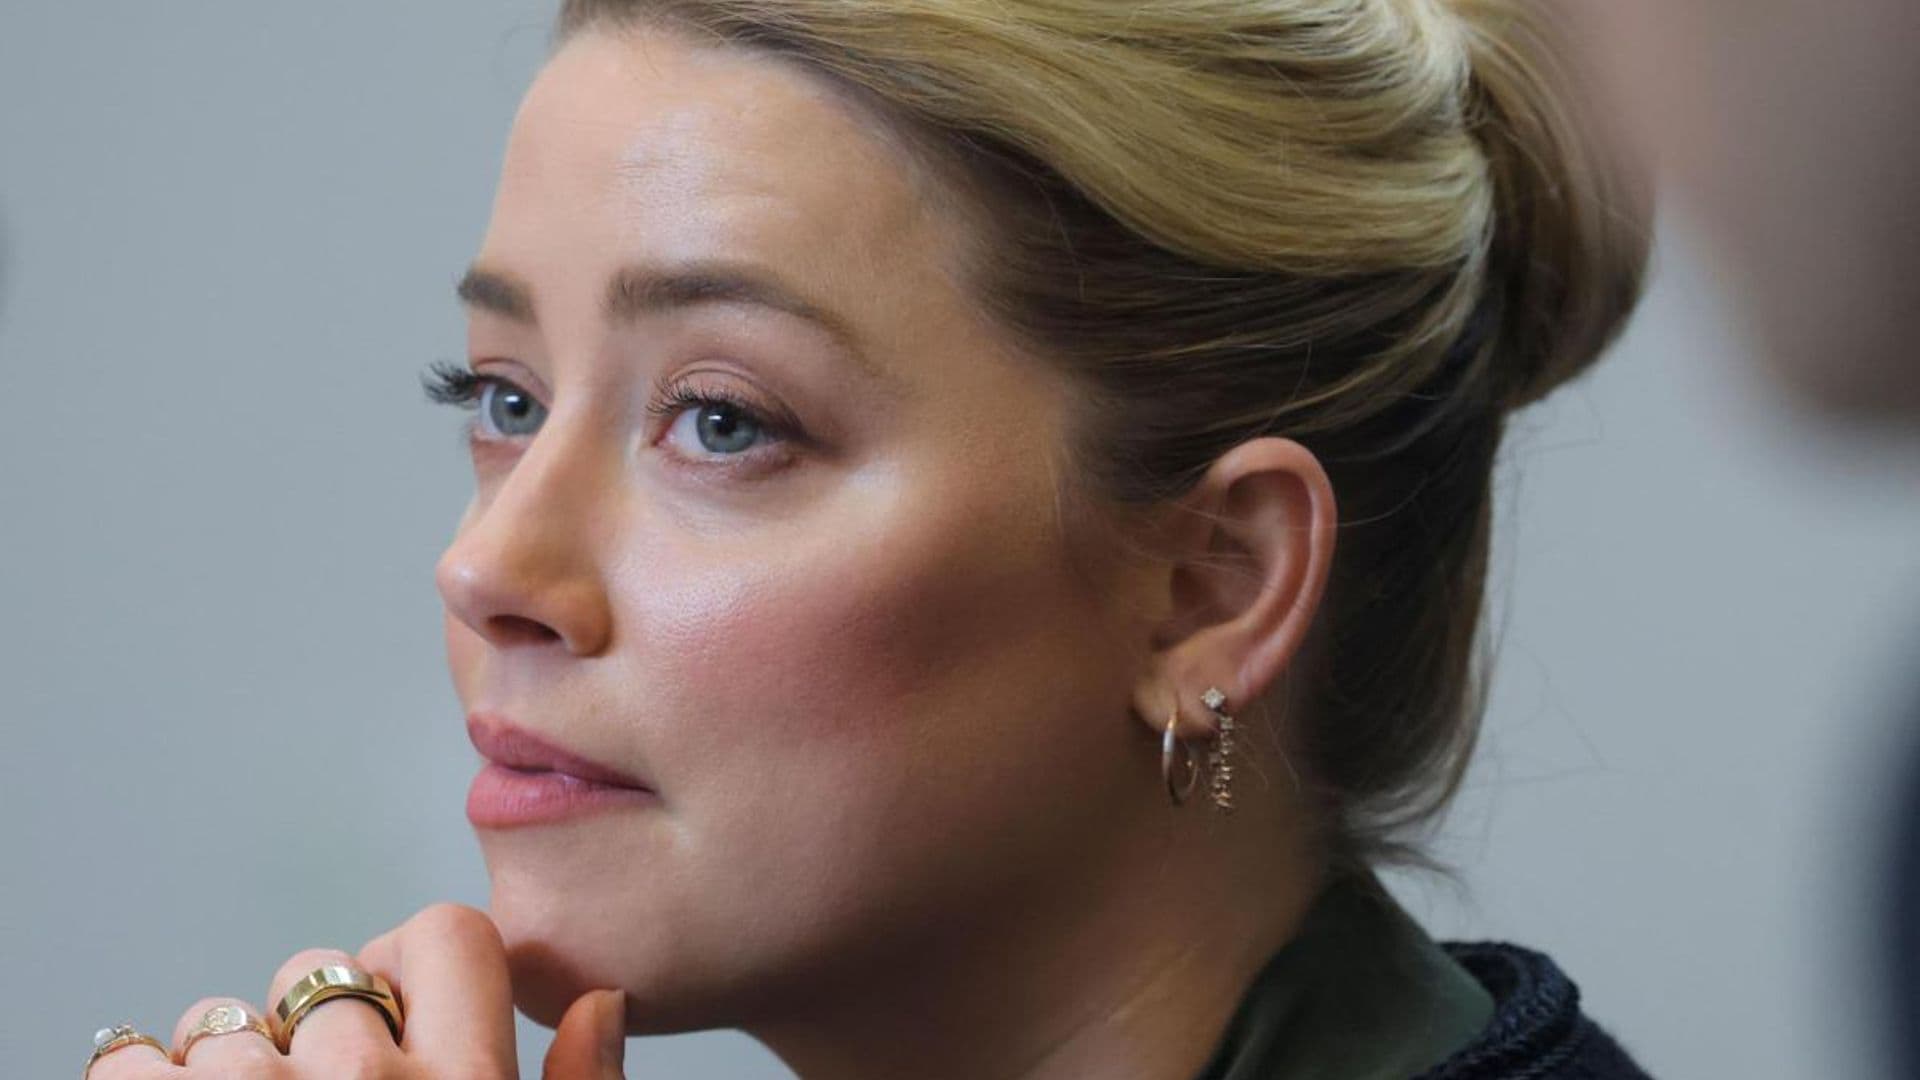 Amber Heard is trying to remain optimistic after the conclusion of the defamation court case